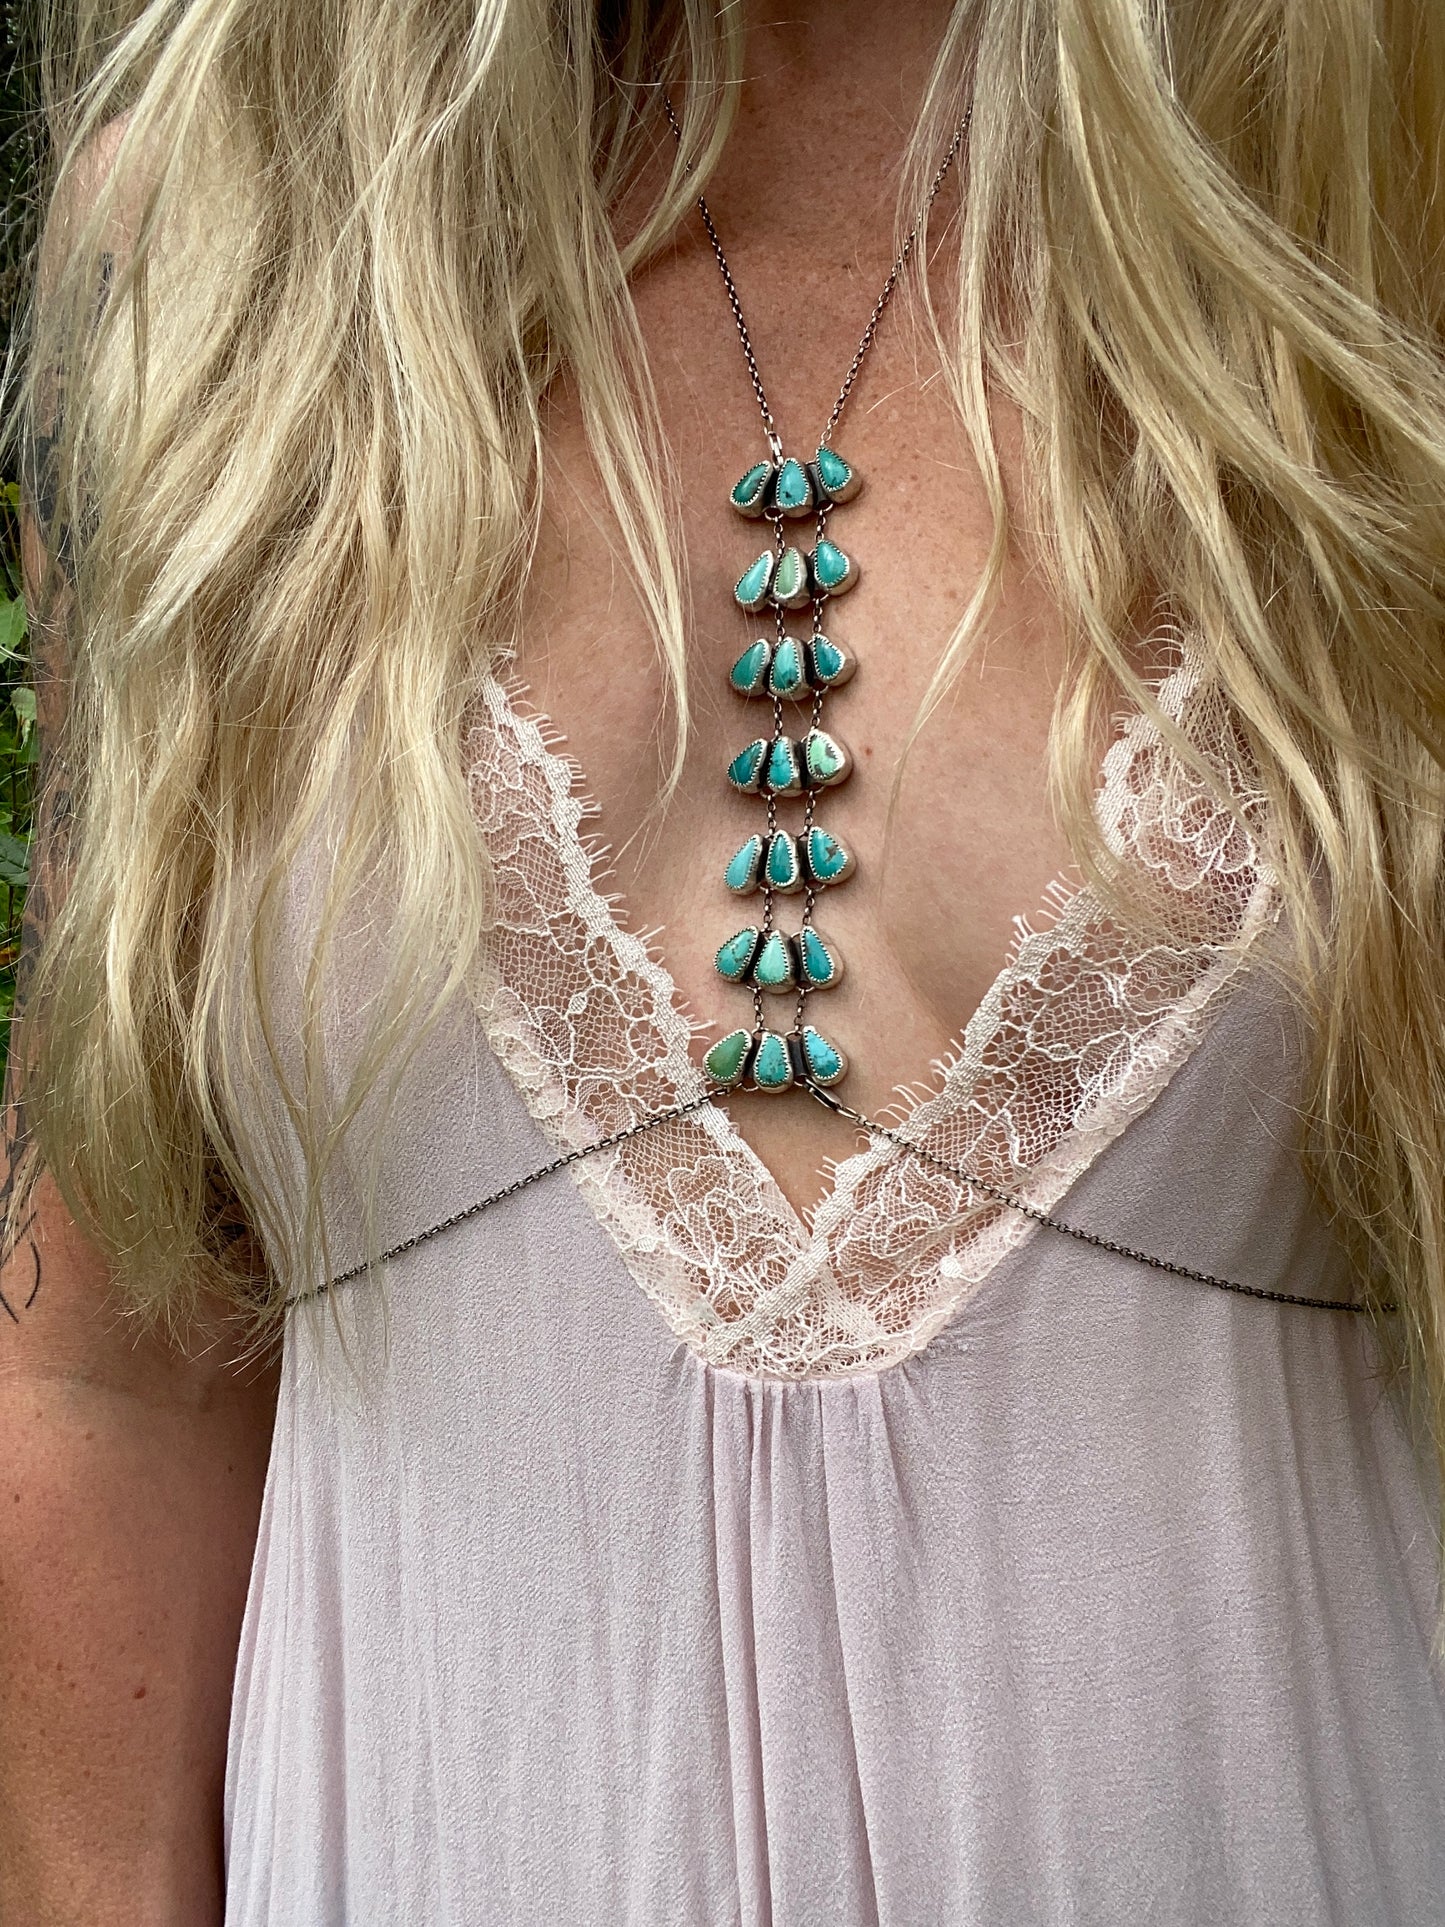 Tides Body Necklace | Custom Sizing Available